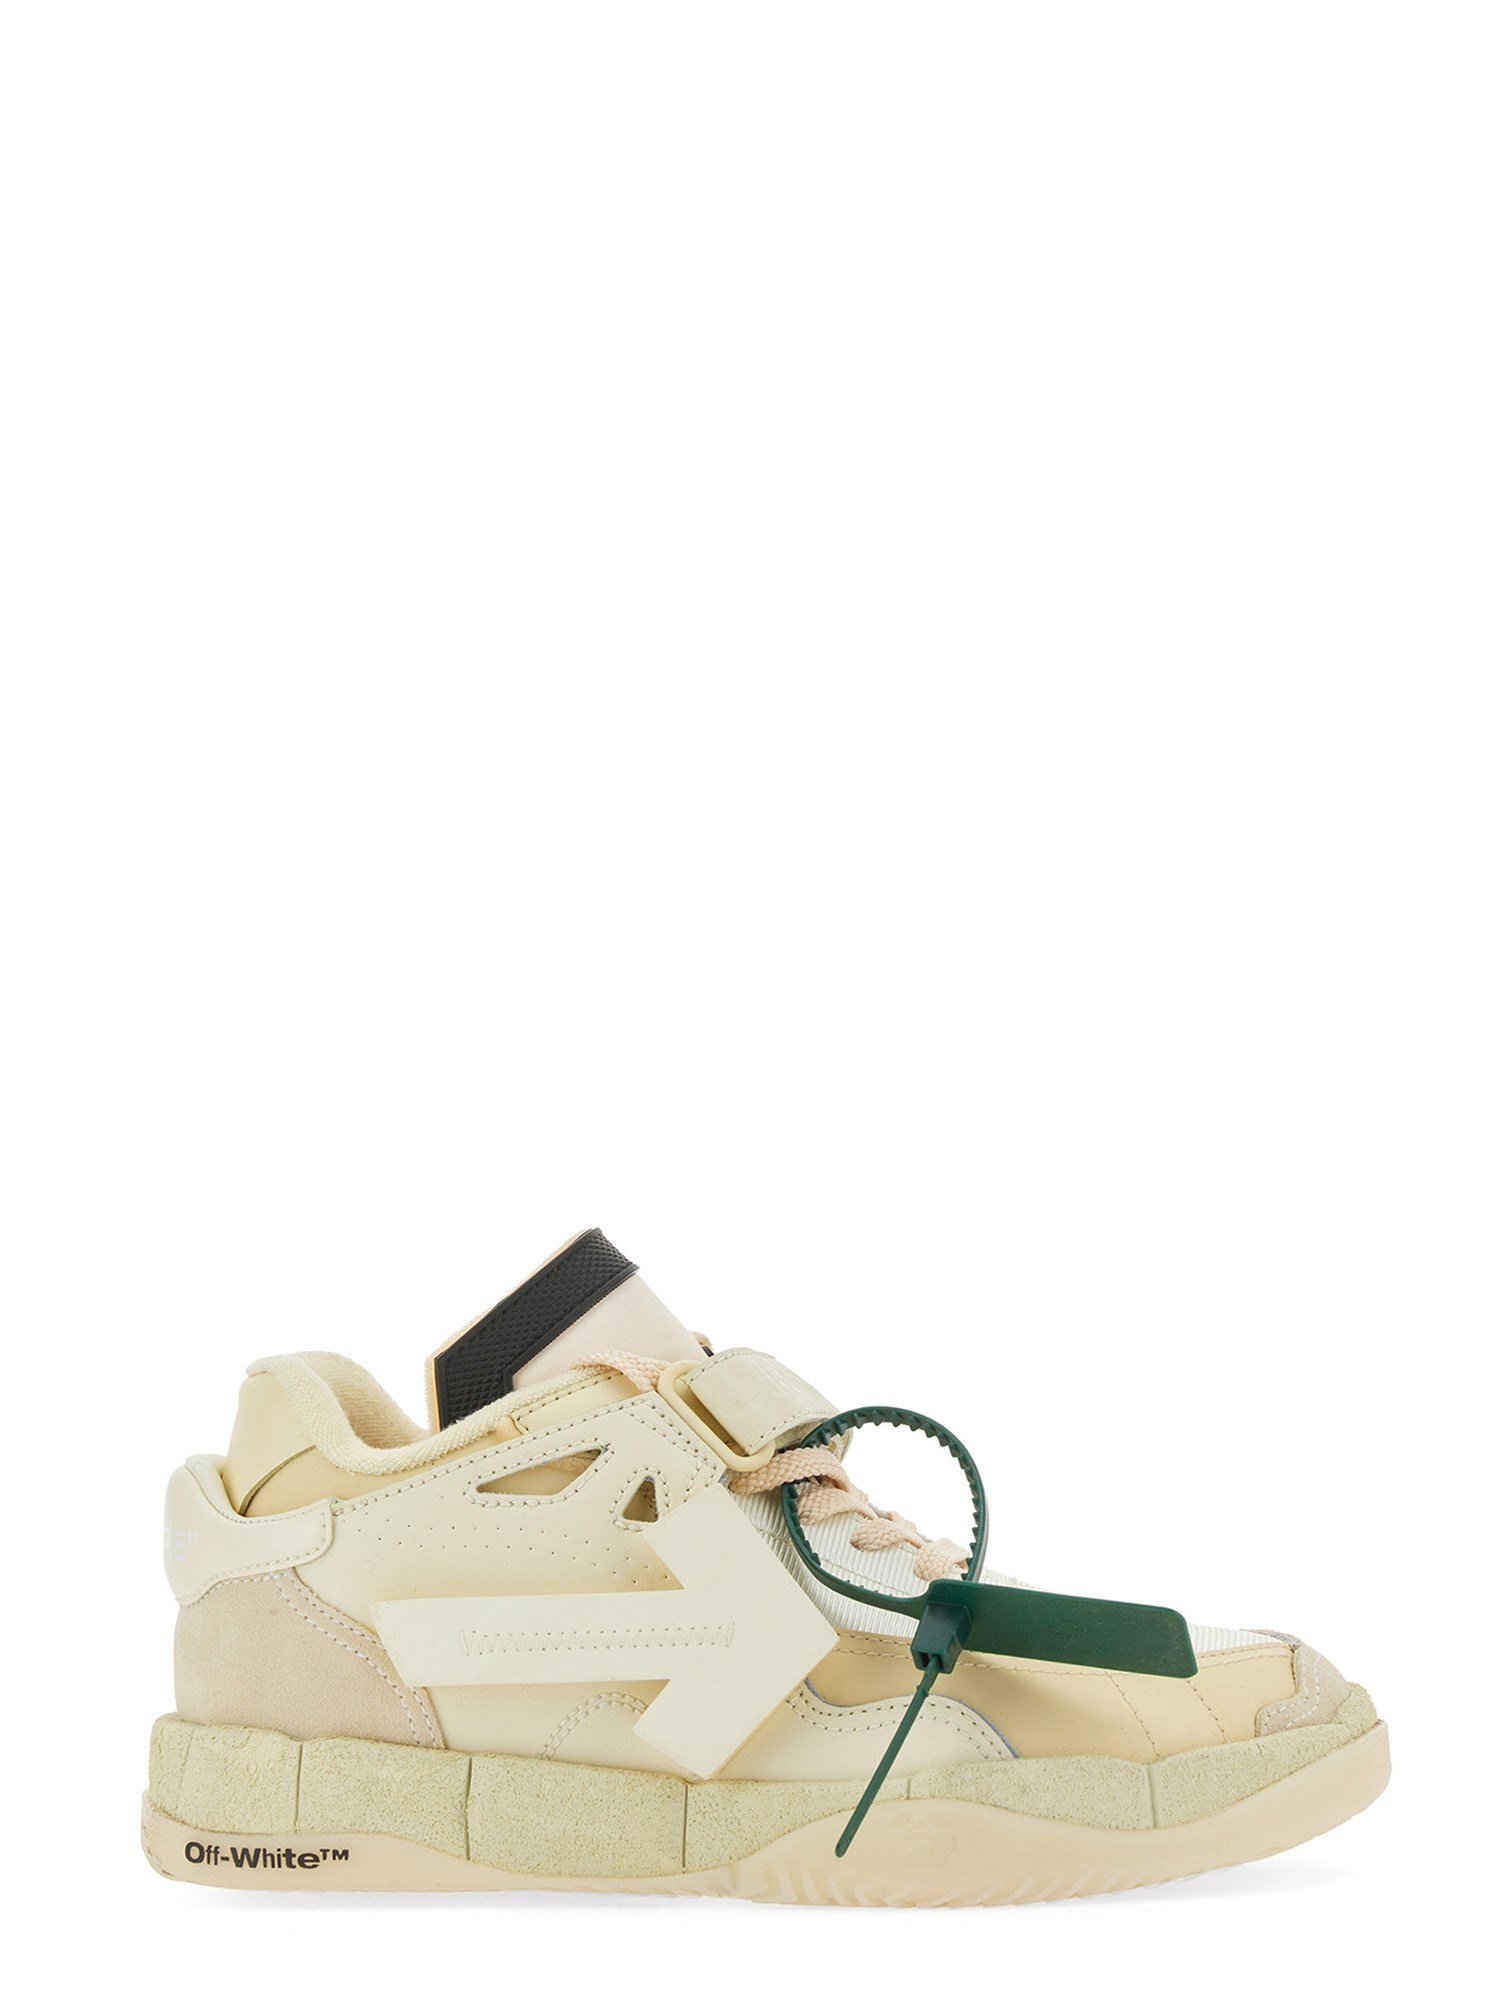 off-white low top sneaker